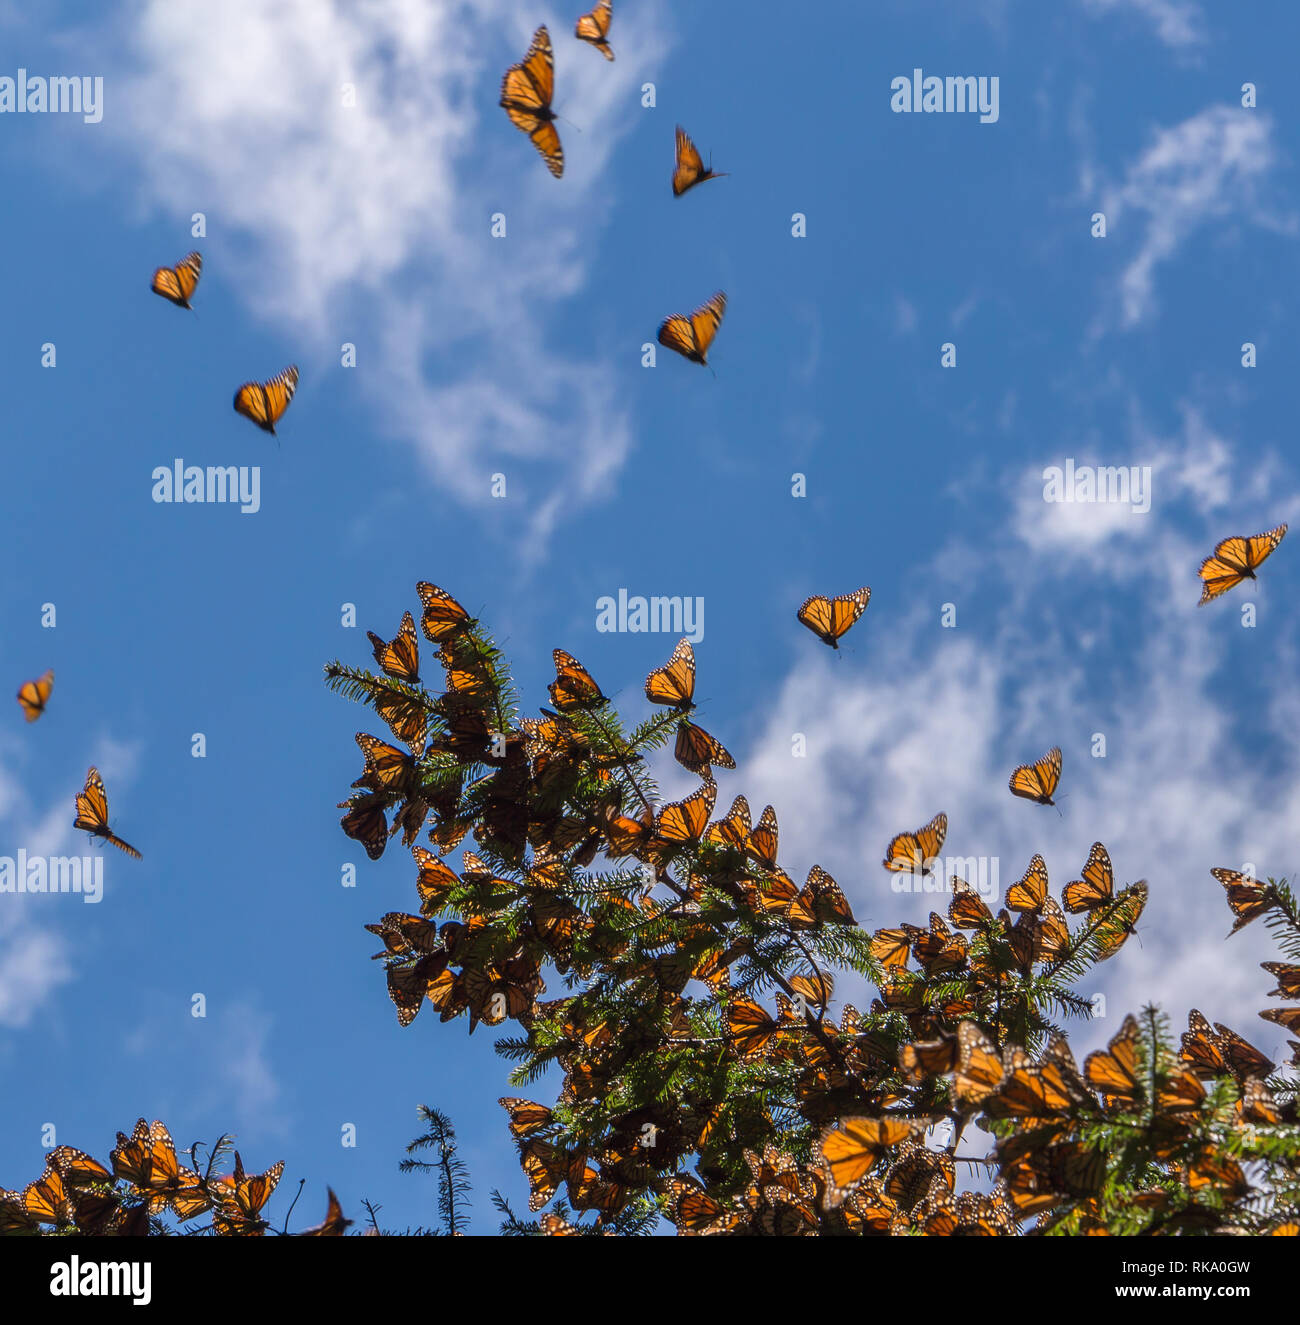 Monarch Butterflies on tree branch  with blue sky in background at the Monarch Butterfly Biosphere Reserve in Michoacan, Mexico, a World Heritage Site Stock Photo